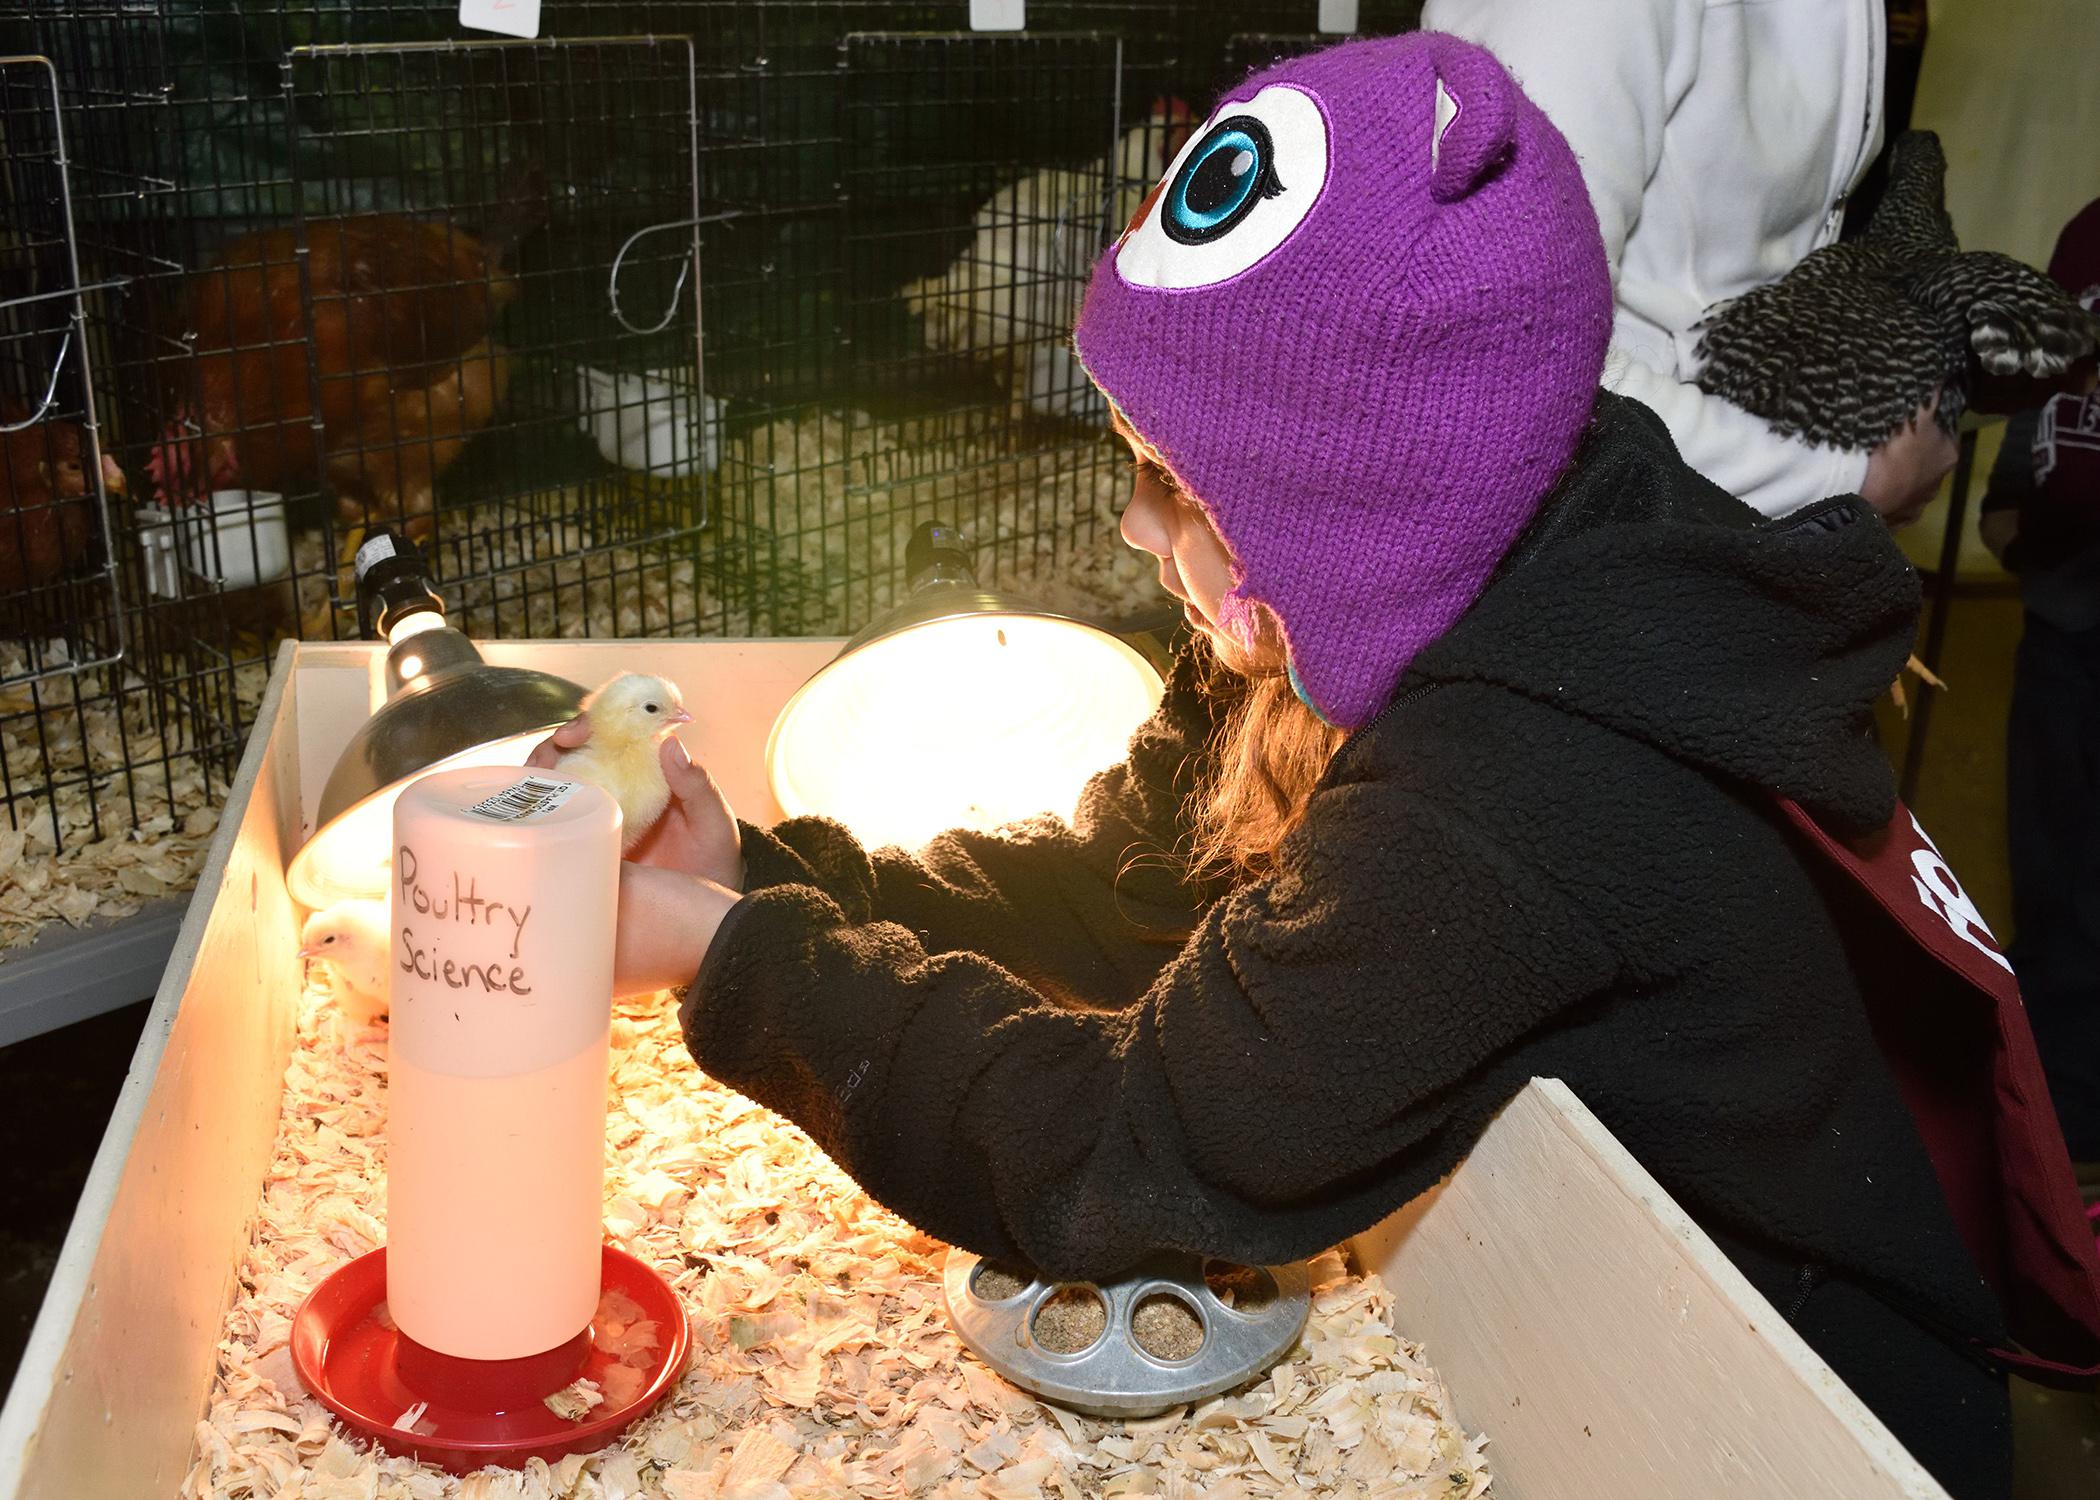 Aimee Buckley, a member of Morgan Moss’s third-grade class at Houston Upper Elementary School, holds a chick at the FARMtastic event at Mississippi State University on Nov. 13, 2014. (Photo by MSU Ag Communications/Kevin Hudson)